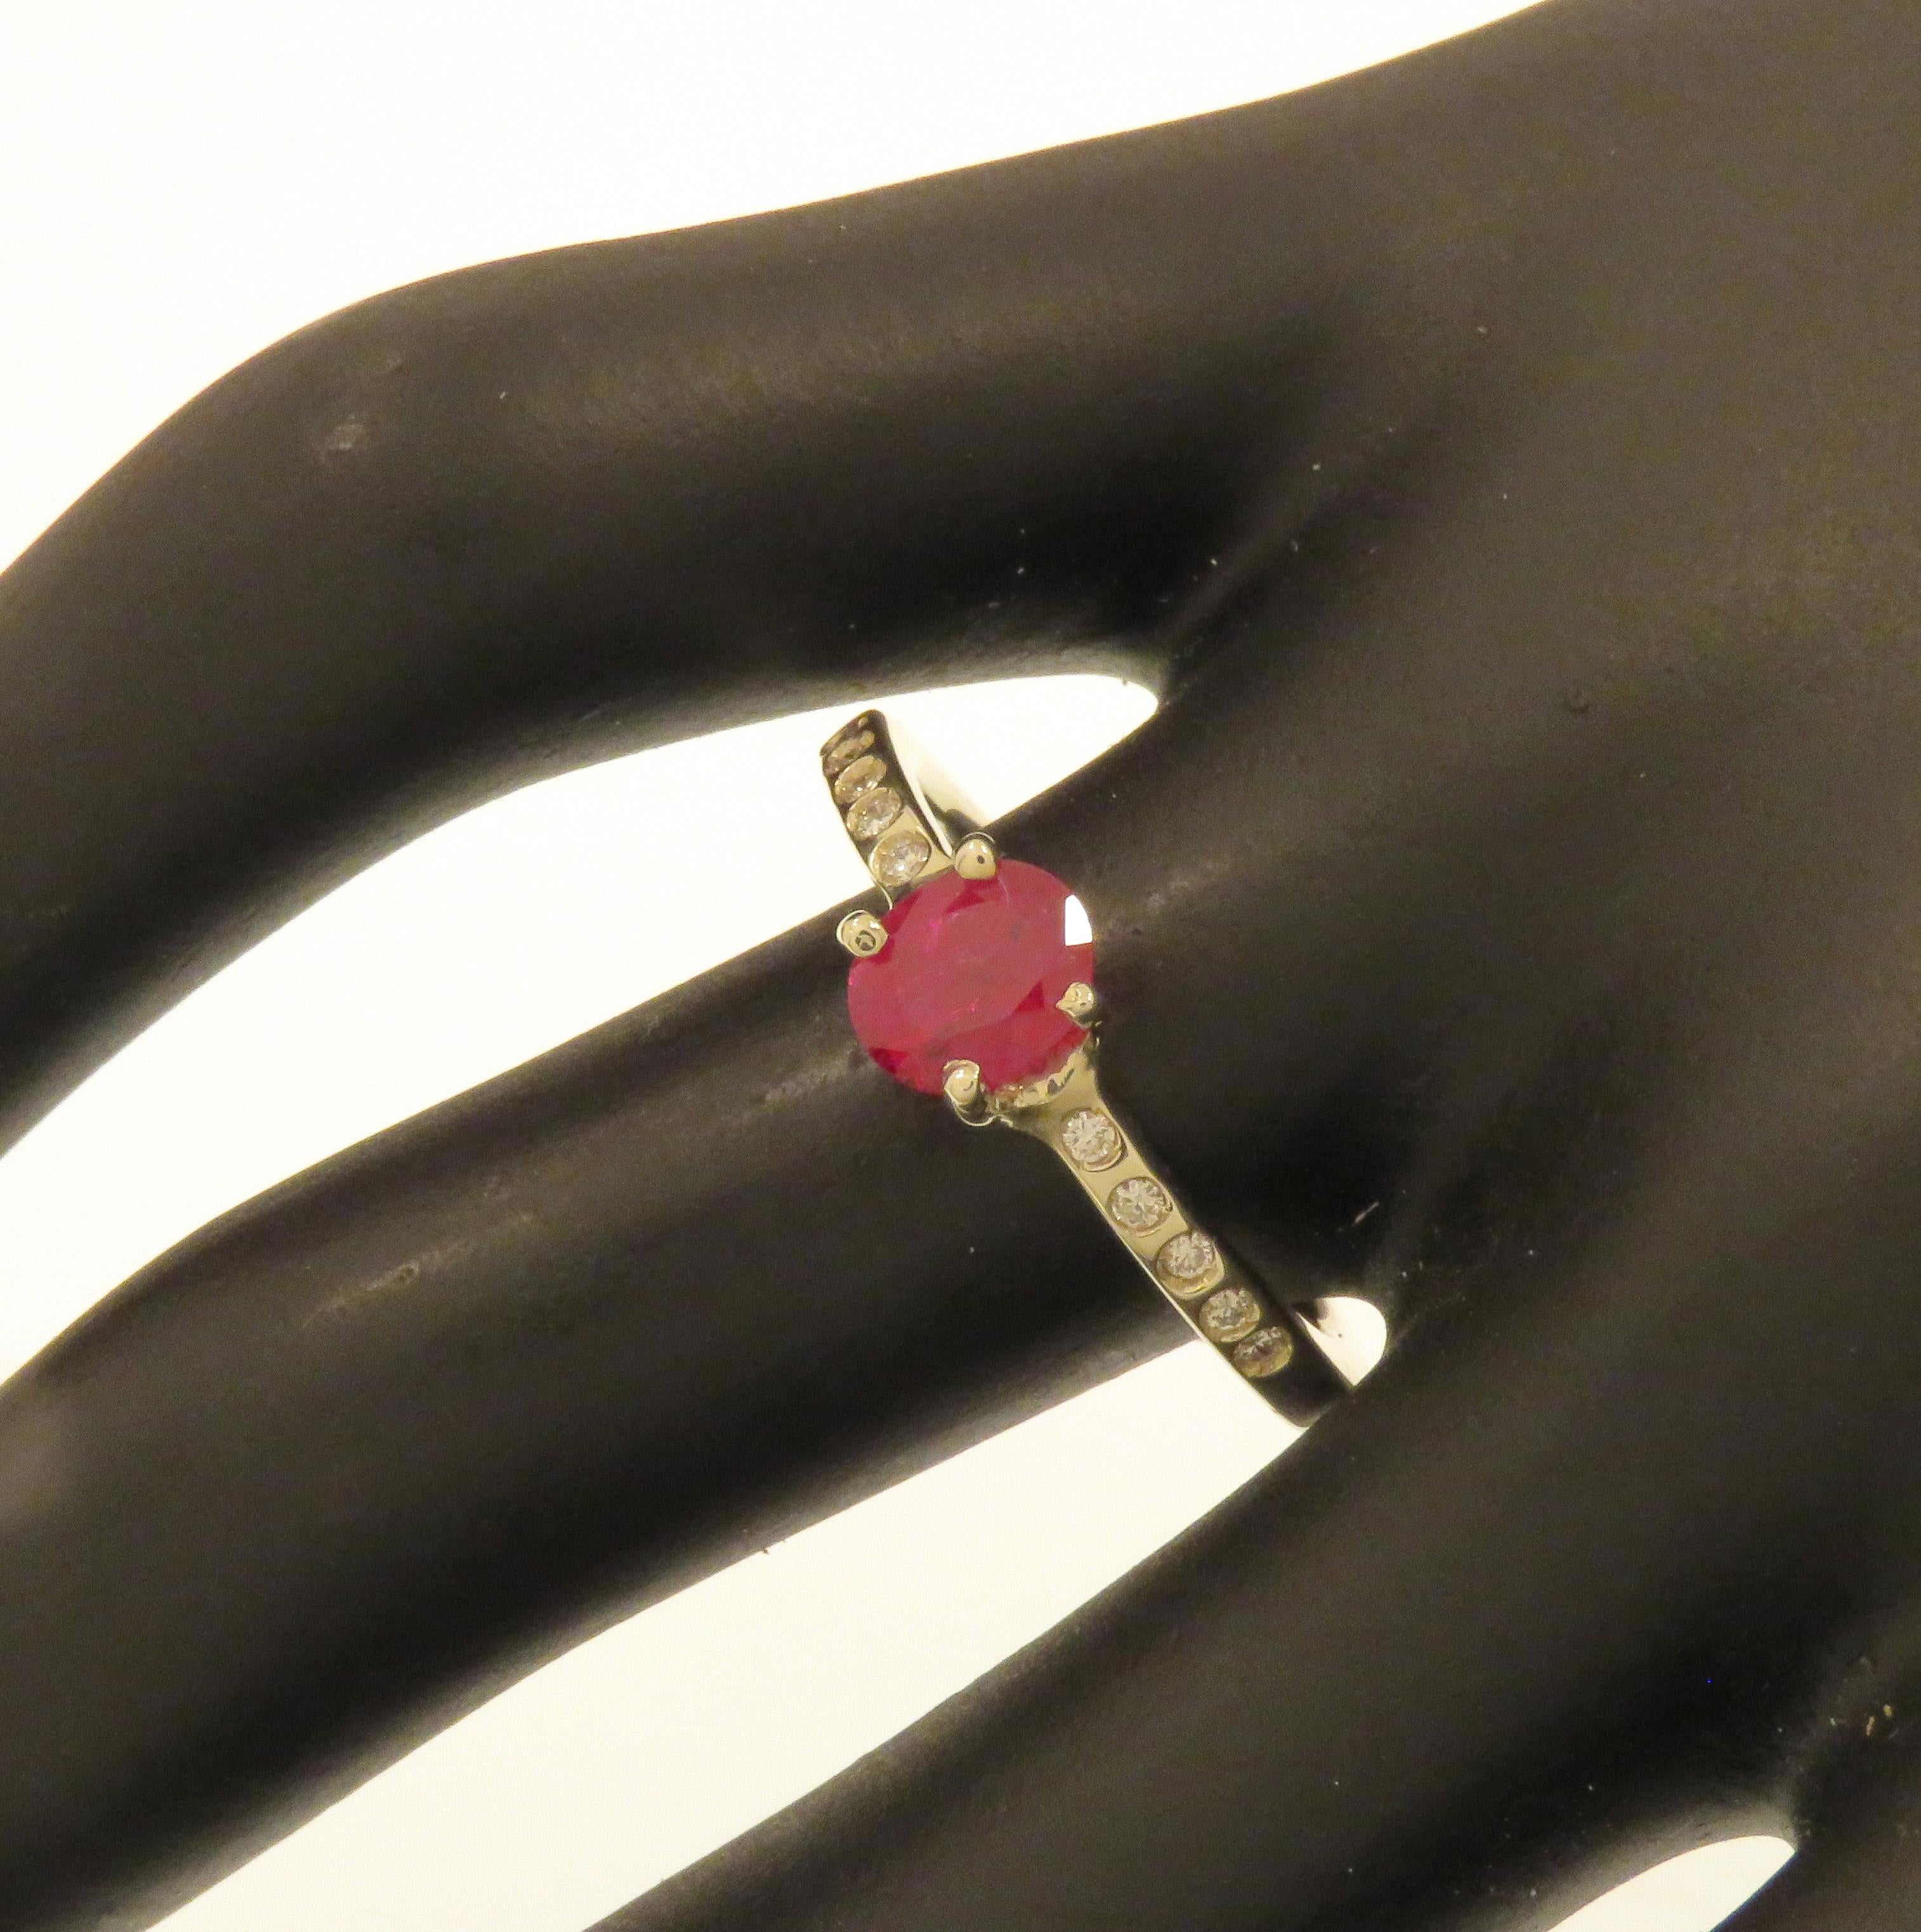 Stunning solitaire ring featuring a natural ruby oval cut and 10 diamonds on the ring shoulders. Handmade in 9k white gold. Marked with the Italian gold mark 375 and Botta Gioielli brandmark 716MI.

Handcrafted in: 9k white gold.
1 natural oval cut